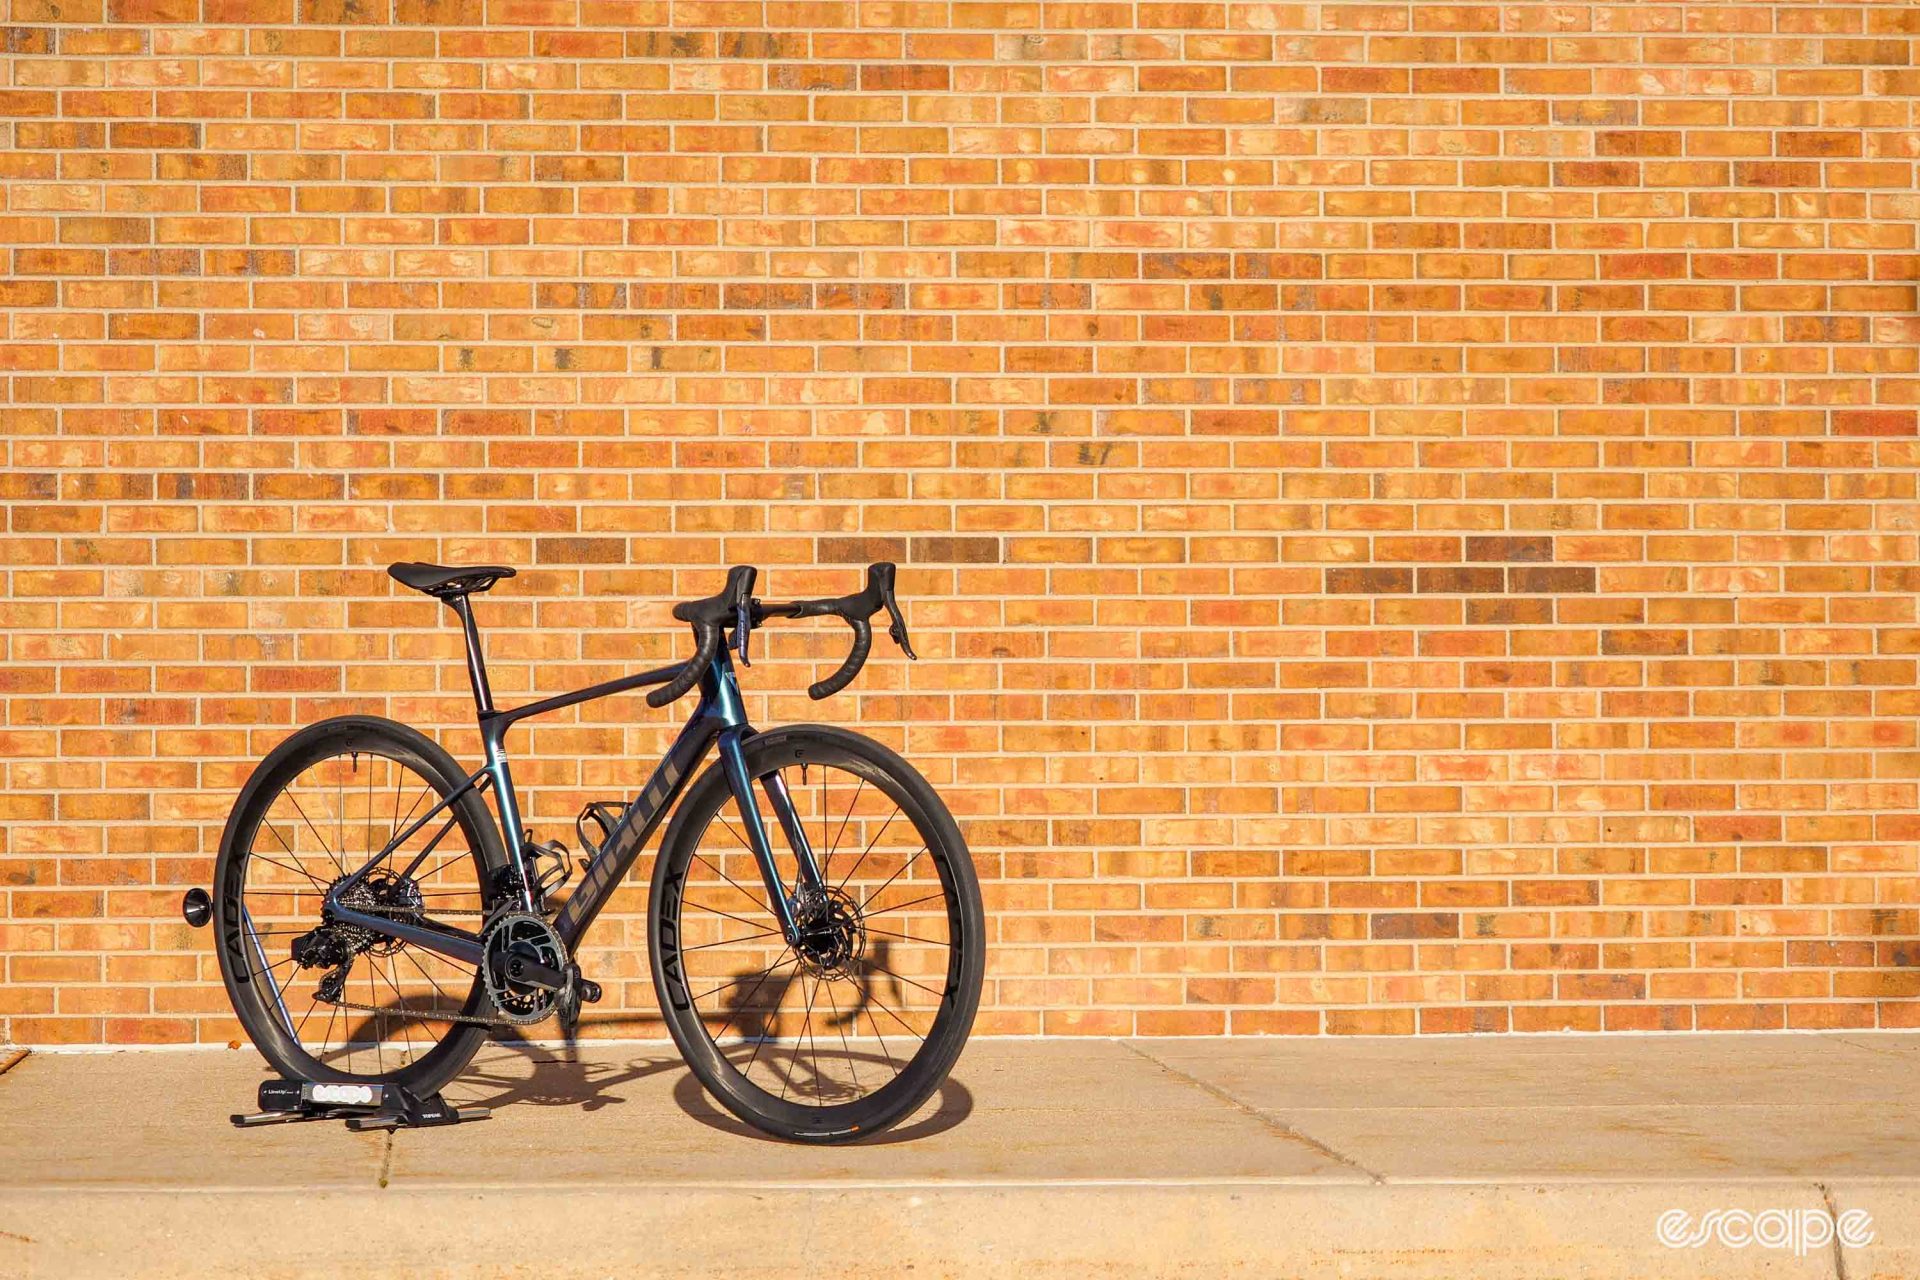 The 2024 Giant Defy Advanced SL 0 model in our test, shown in profile against a red brick wall in warm light.